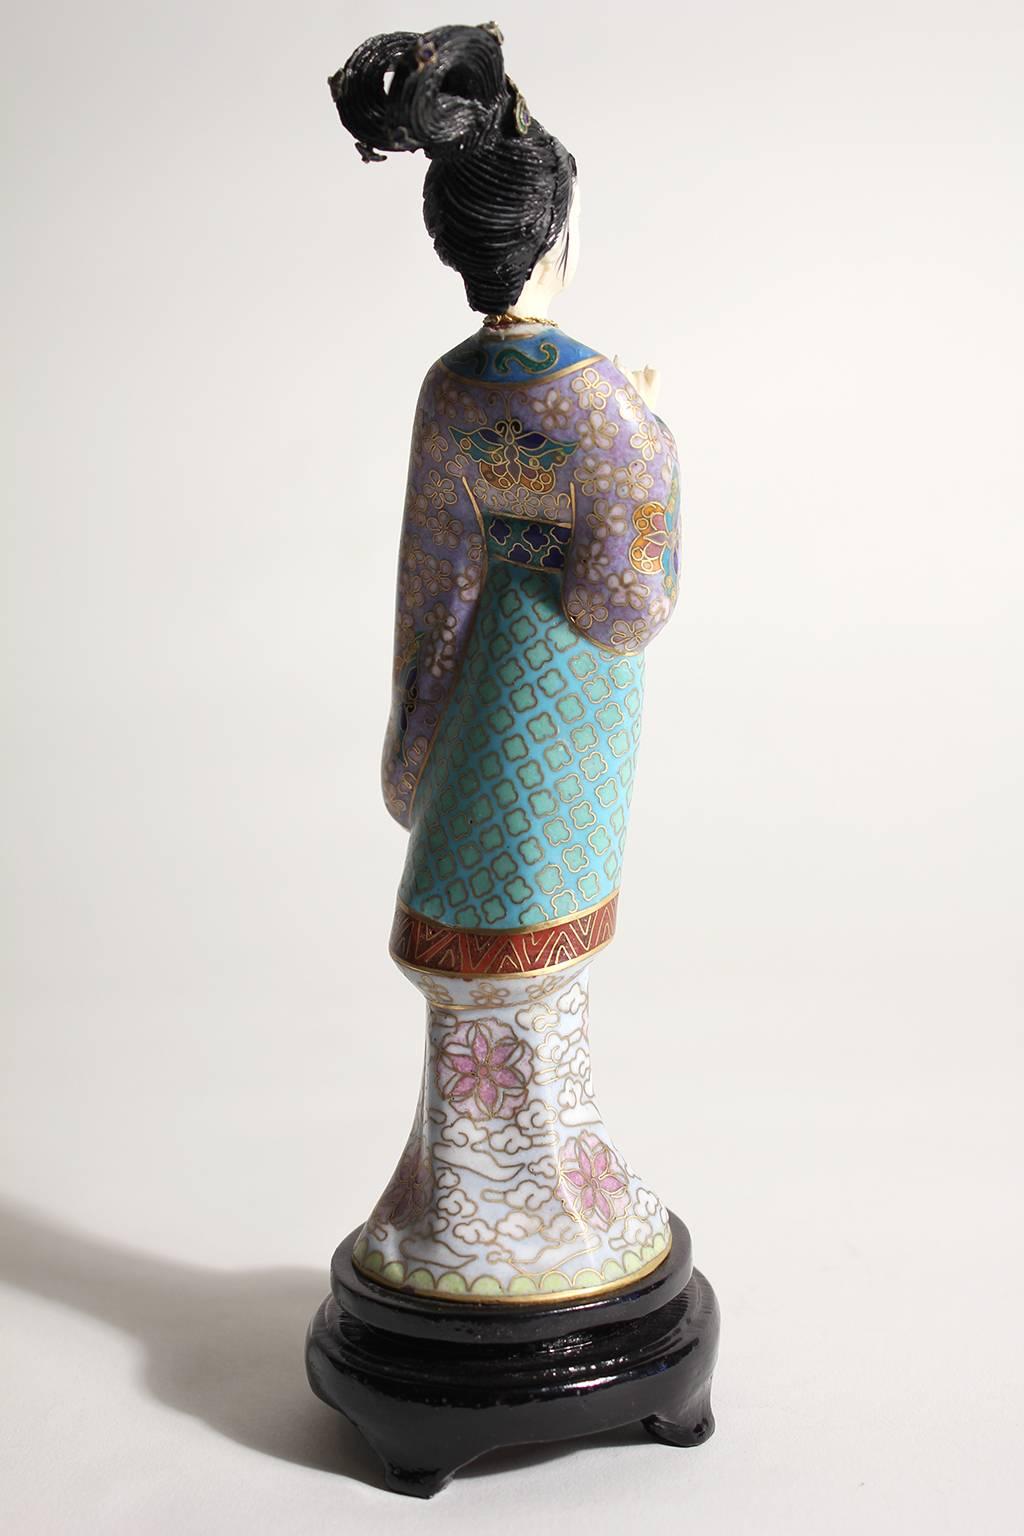 Antique Chinese Cloisonne Enameled Carved Guanyin Quan Yin Sculpture Figurine In Excellent Condition For Sale In San Diego, CA